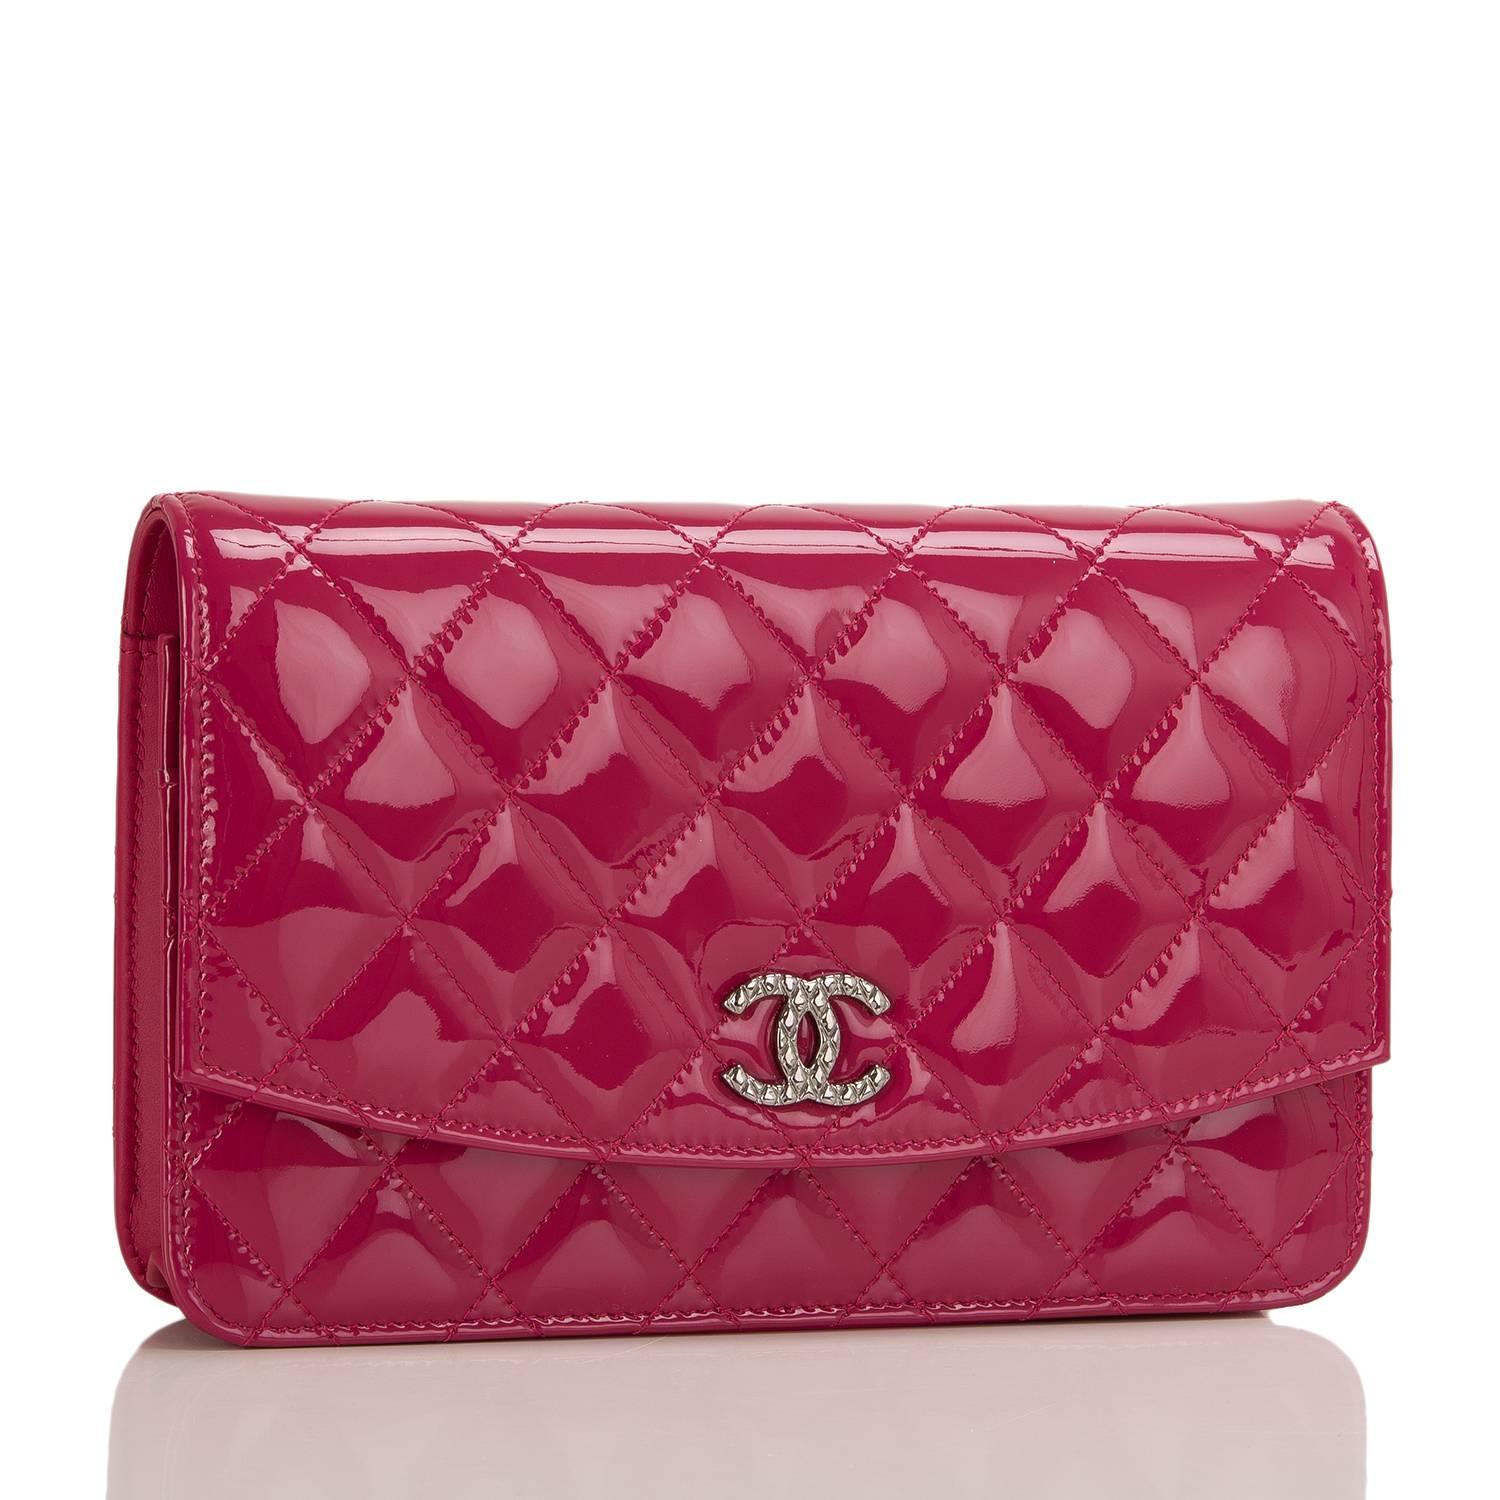 This dark red quilted patent timeless WOC with ruthenium hardware features signature Chanel quilting, front flap with CC charm and hidden snap closure, expandable sides and bottom, half moon rear pocket and interwoven ruthenium chain and leather